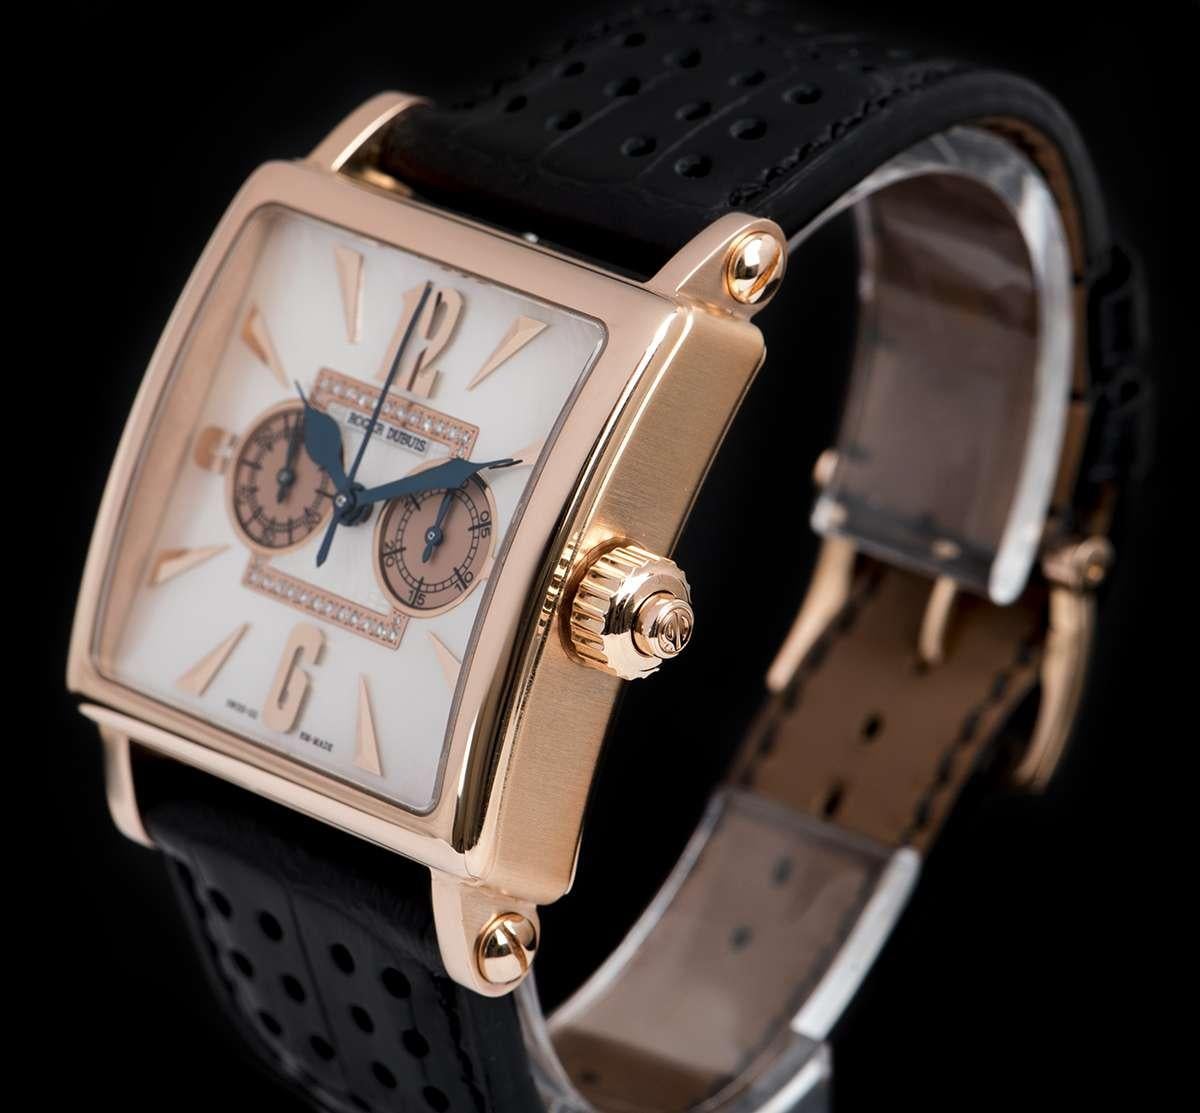 An 18k Rose Gold Limited Edition Golden Square Gents 34mm Wristwatch, mother of pearl dial set with approximately 28 round brilliant cut diamonds, applied hour markers and applied arabic numbers 3, 6, 9 and 12, 30 minute recorder at 3 0'clock, small